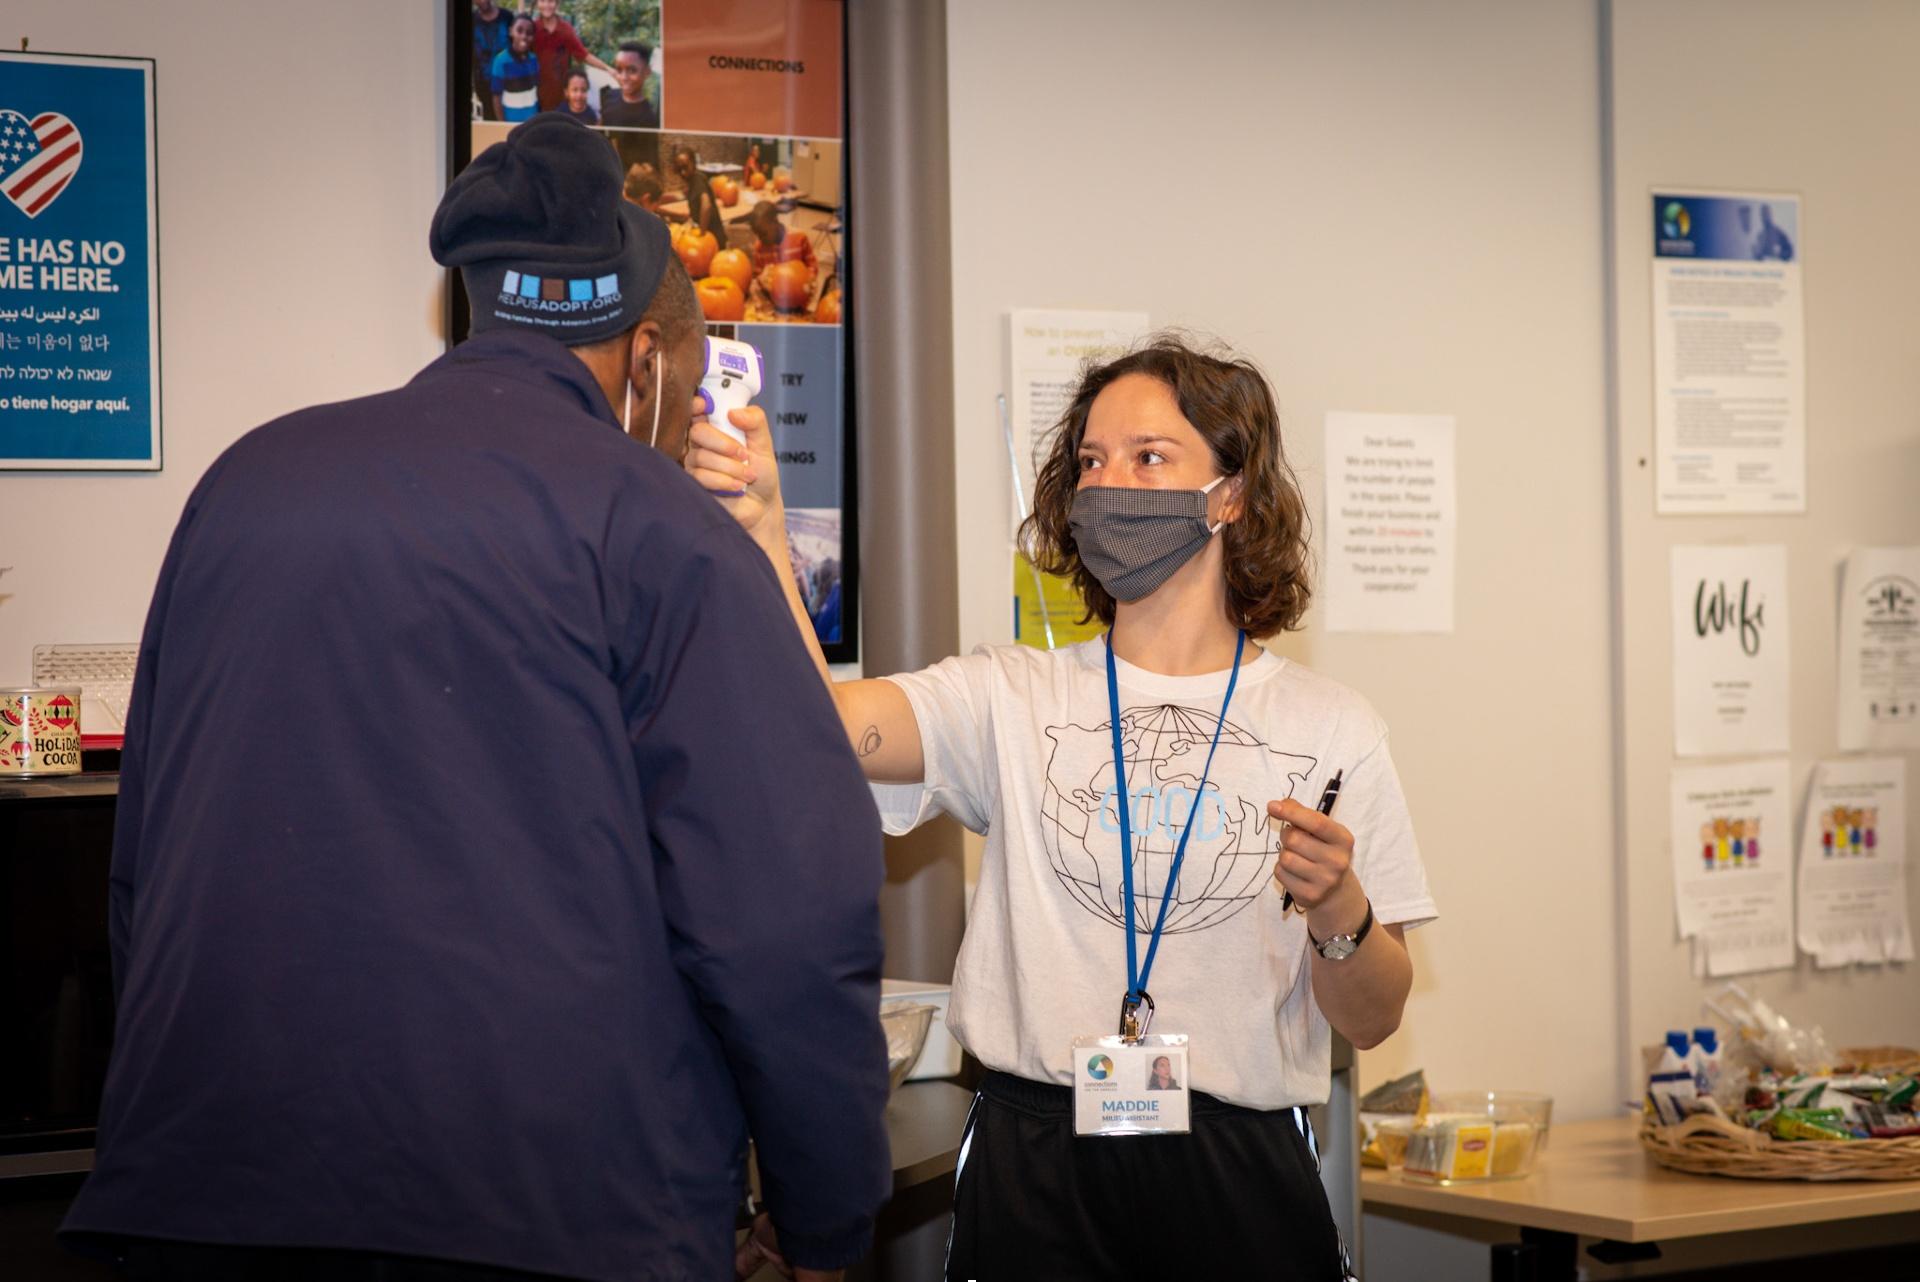 A staff member at Connections for the Homeless takes a person’s temperature. (Credit: Hex Hernandez Photography)